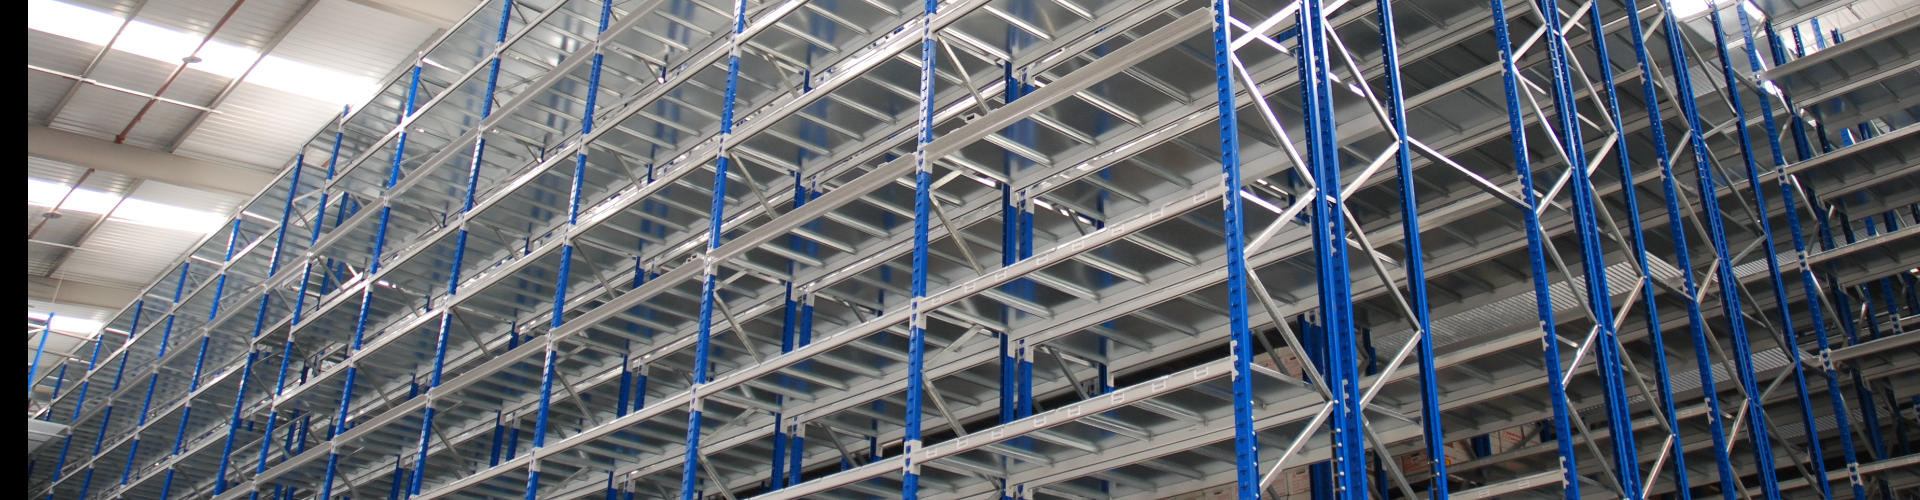 Racking System Extension